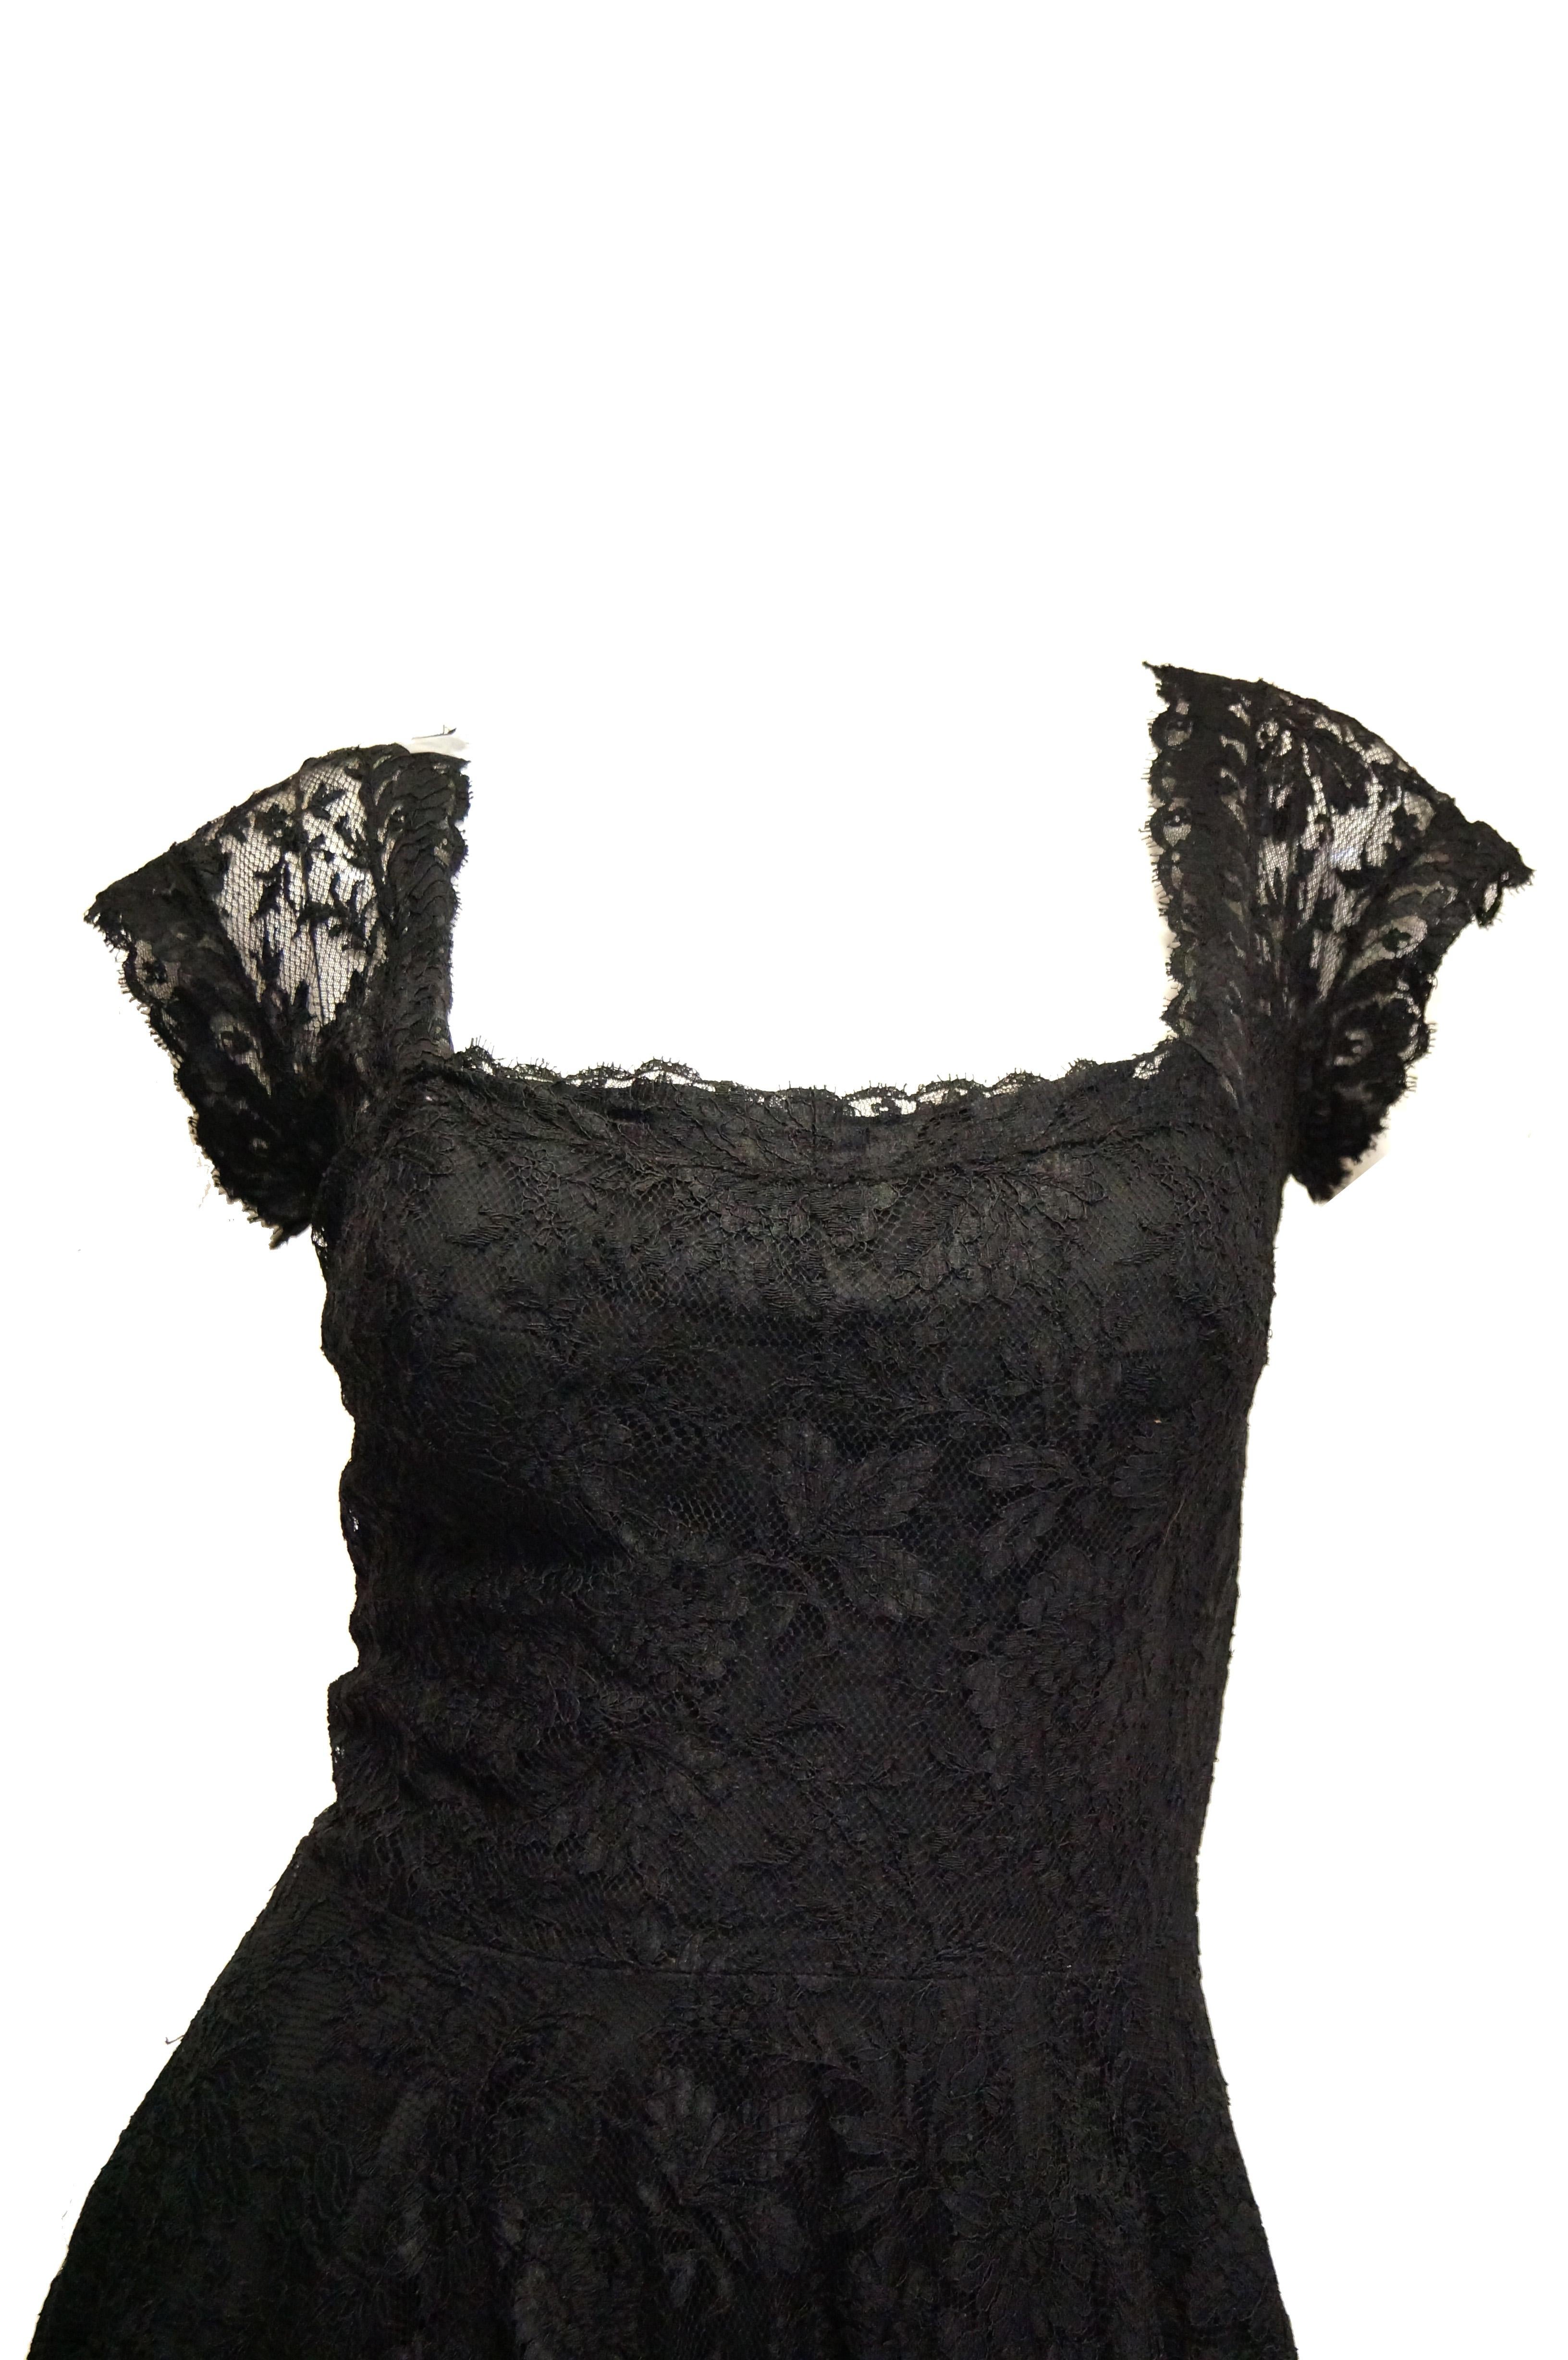 Beautiful black floral lace evening dress. The dress has an a - line silhouette with a rather full skirt, fitted bodice, short capped sleeves, a low, square neckline, and a surprisingly low scoop back (rather scandalous for the 1950s!). Zipper in